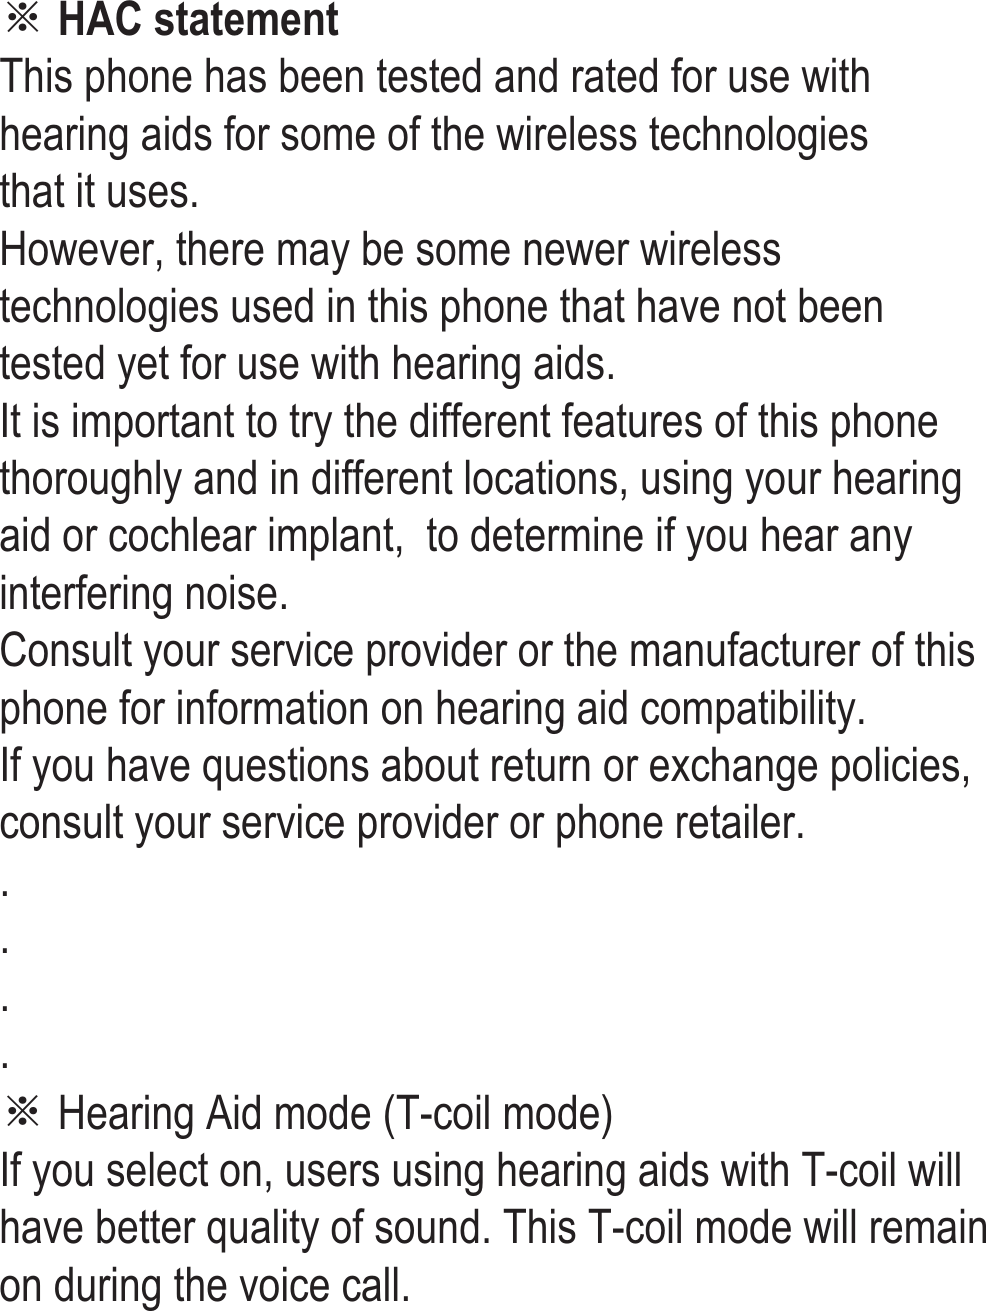 ※ HAC statement This phone has been tested and rated for use with hearing aids for some of the wireless technologies  that it uses.  However, there may be some newer wireless technologies used in this phone that have not been tested yet for use with hearing aids.  It is important to try the different features of this phone thoroughly and in different locations, using your hearing aid or cochlear implant,  to determine if you hear any interfering noise.  Consult your service provider or the manufacturer of this phone for information on hearing aid compatibility.  If you have questions about return or exchange policies, consult your service provider or phone retailer. . . . . ※ Hearing Aid mode (T-coil mode) If you select on, users using hearing aids with T-coil will have better quality of sound. This T-coil mode will remain on during the voice call. 